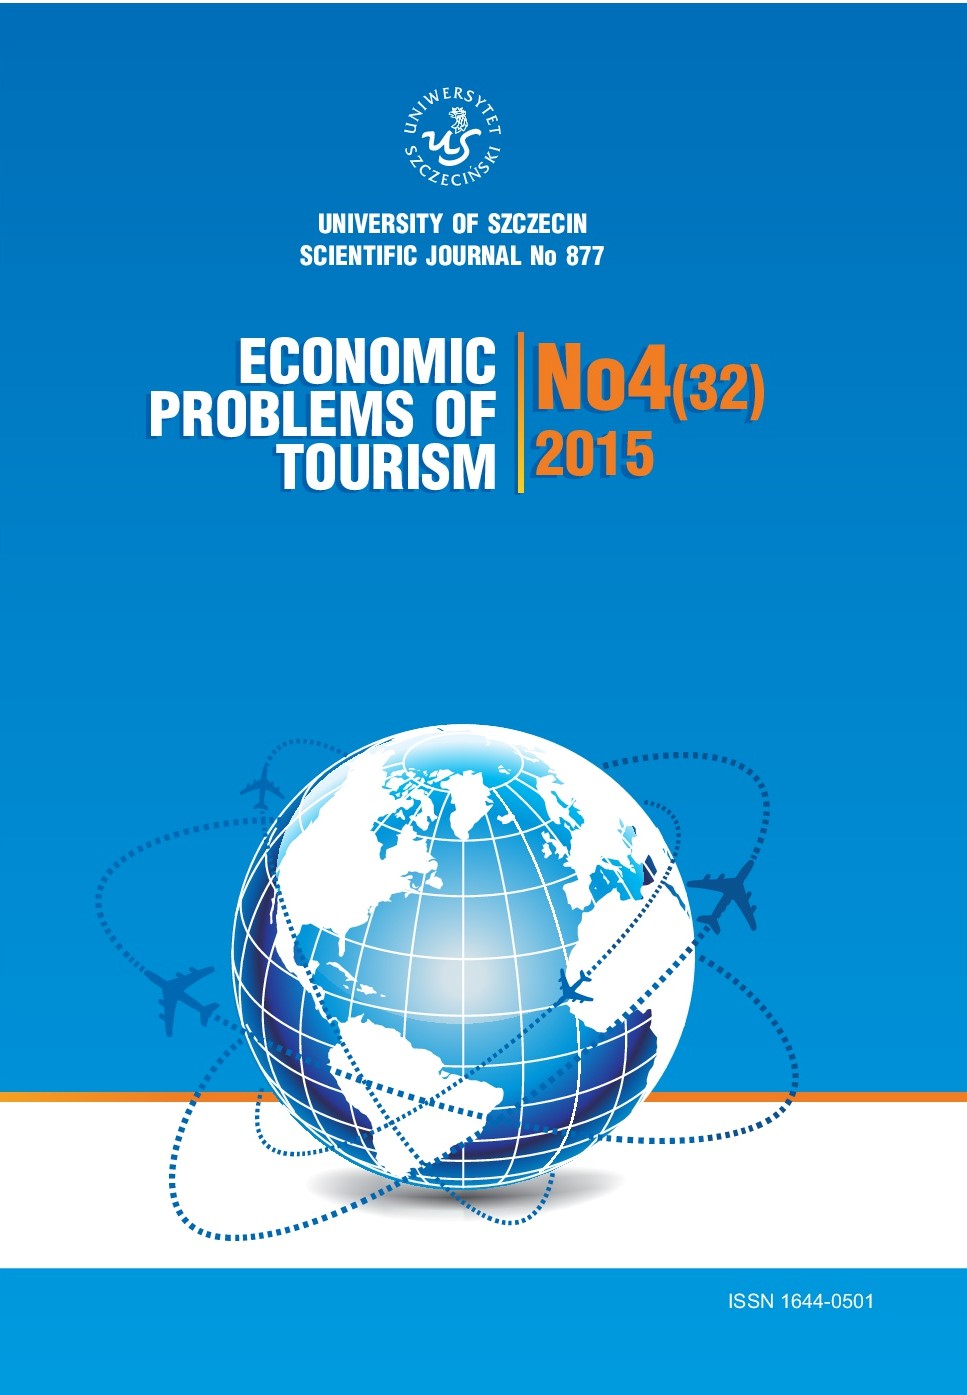 The Sustainable Management of Tourism as Part of the Innovative Region Management. Based on the Europan Tourism Indicators System for Sustainable Destinations Cover Image